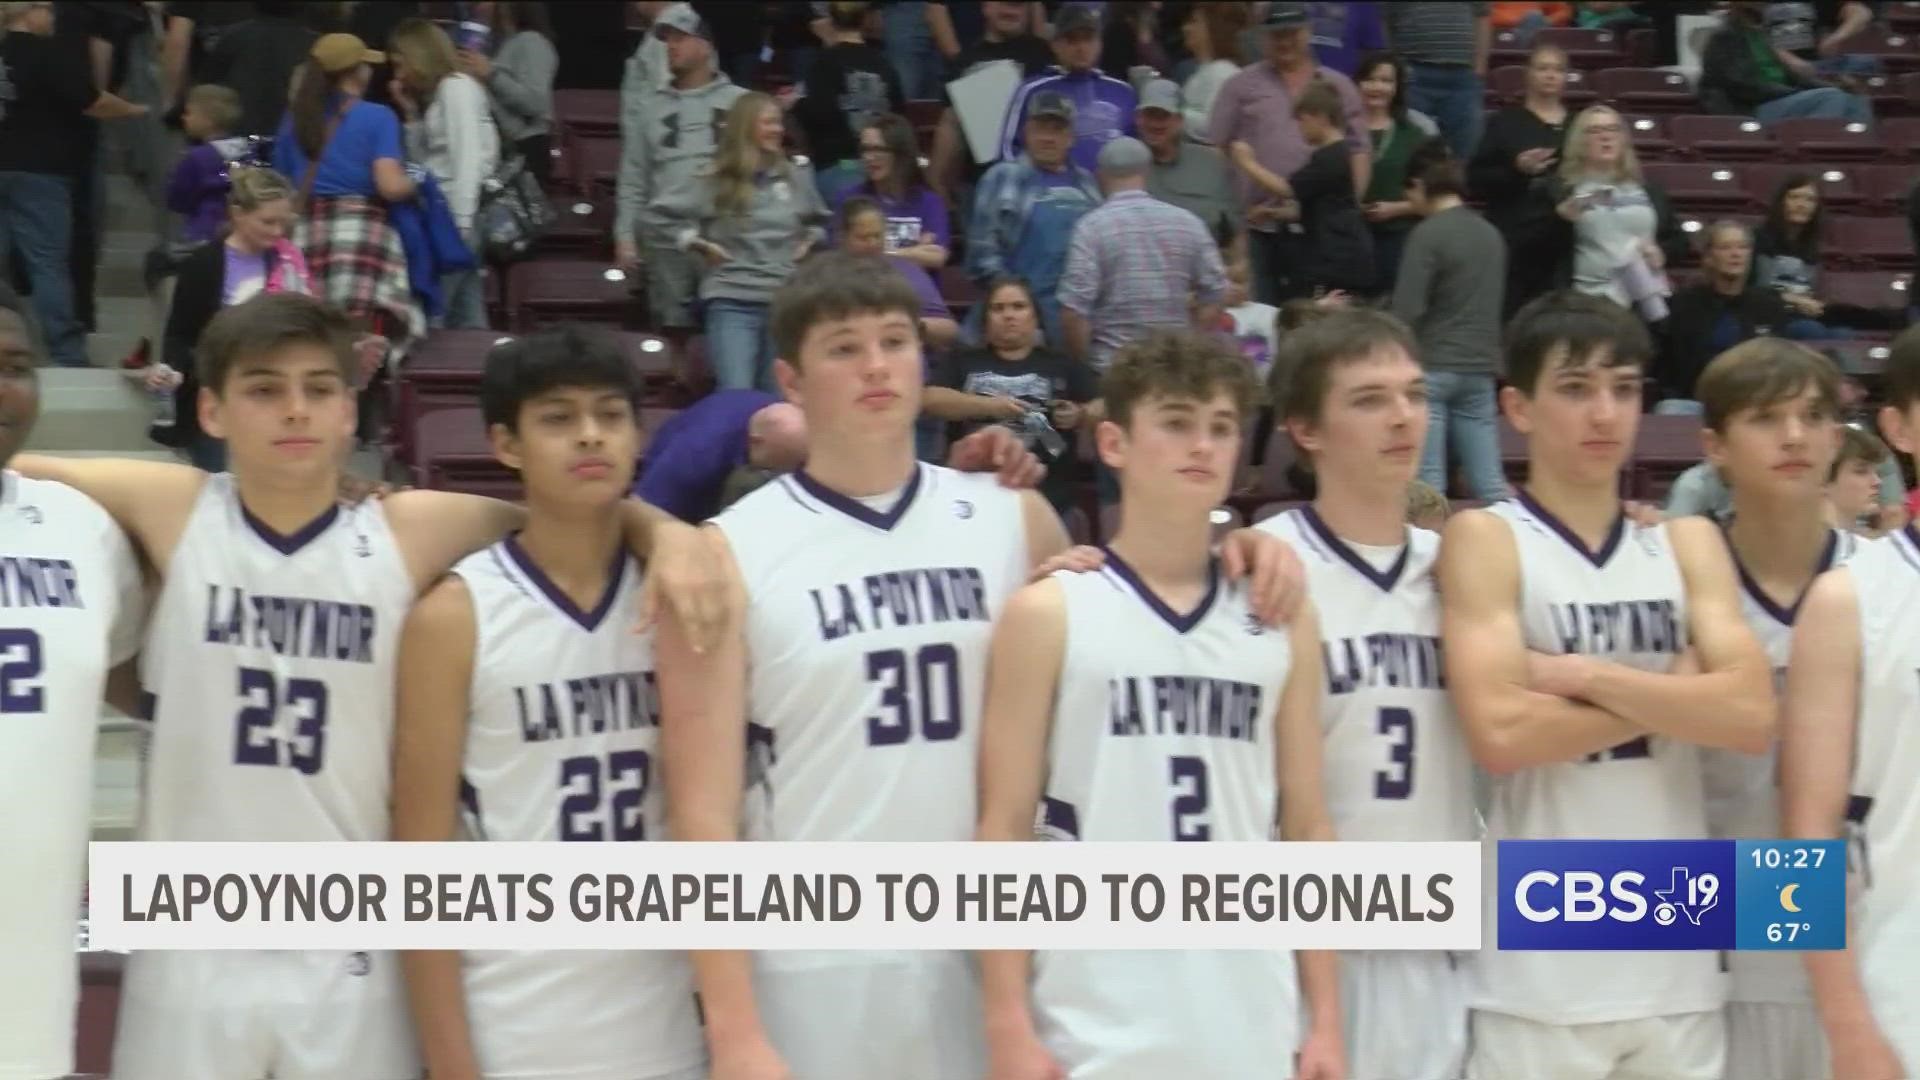 The LaPoynor Flyers meet the Grapeland Sandies for the third straight year in the playoffs, this time in the regional quarterfinals